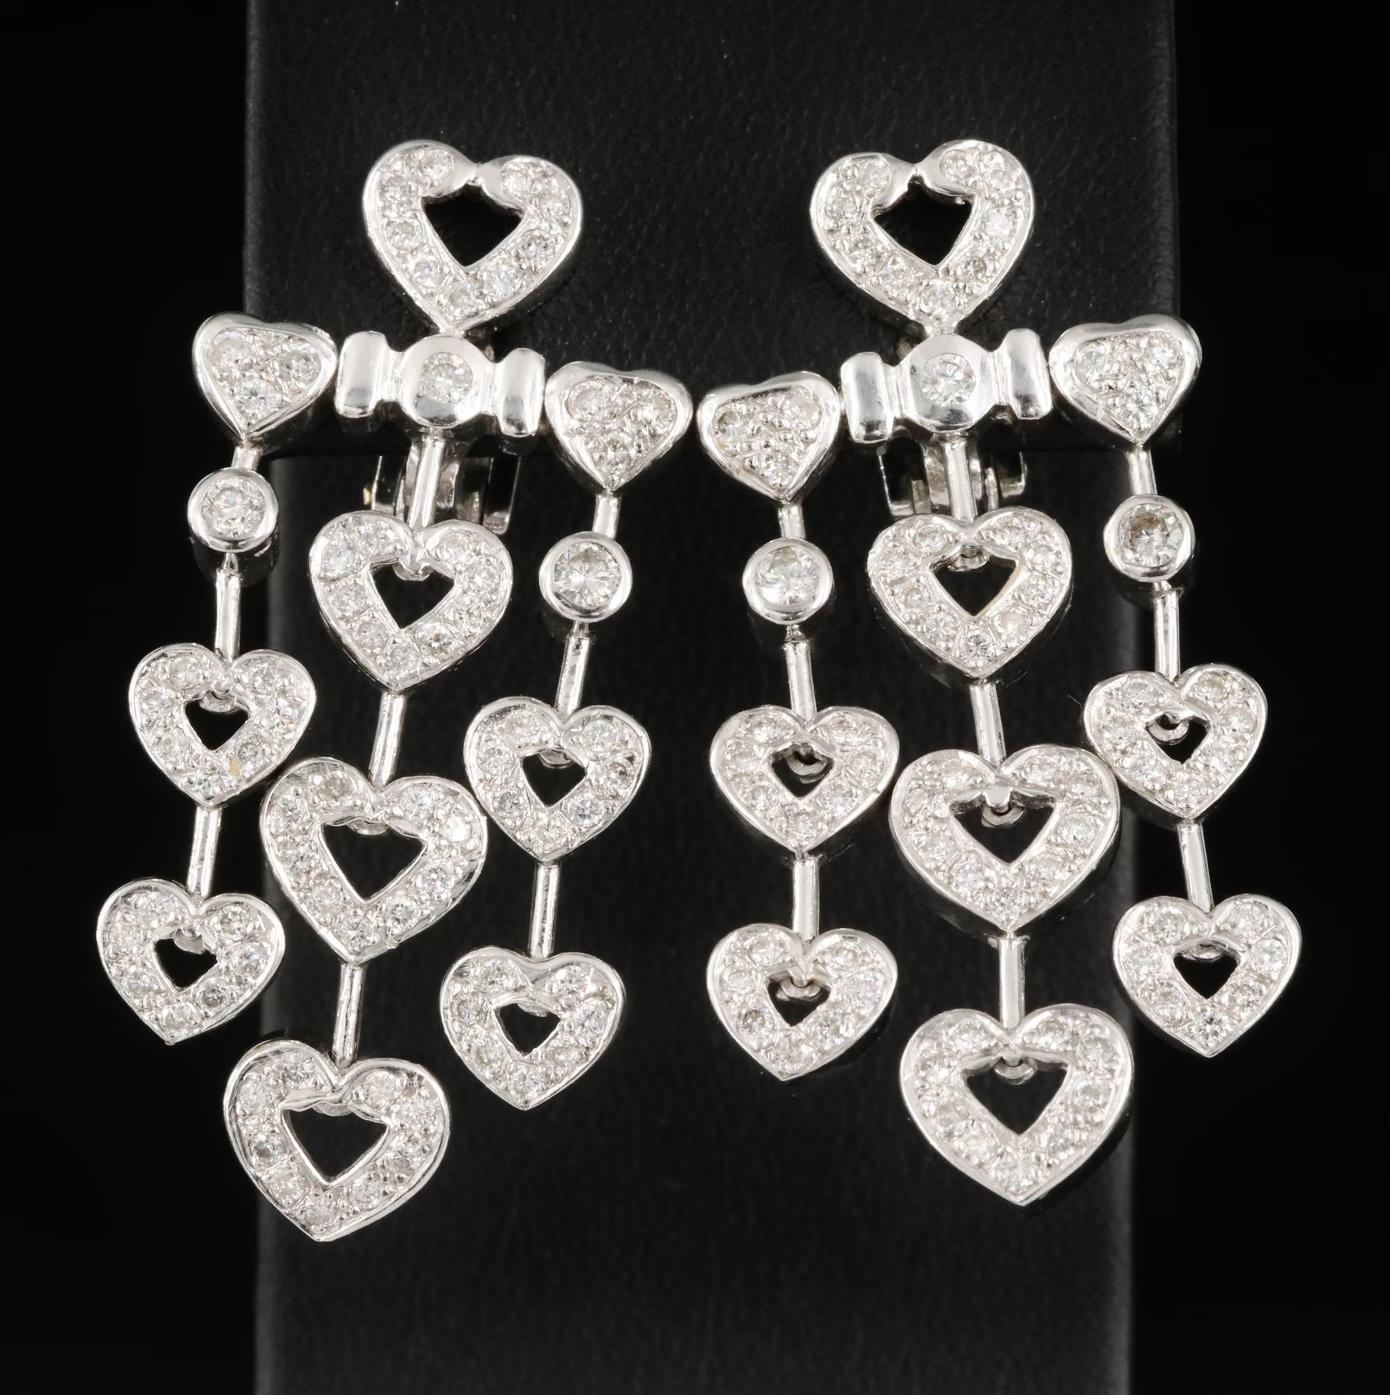 ITALY Designer Earrings

NEW with Tags, tag price $9500

2.65 CWT Diamond, SI Clarity / G white, high quality

18K solid White gold, stamped 18K

Heavy and well made, 24.7 grams 